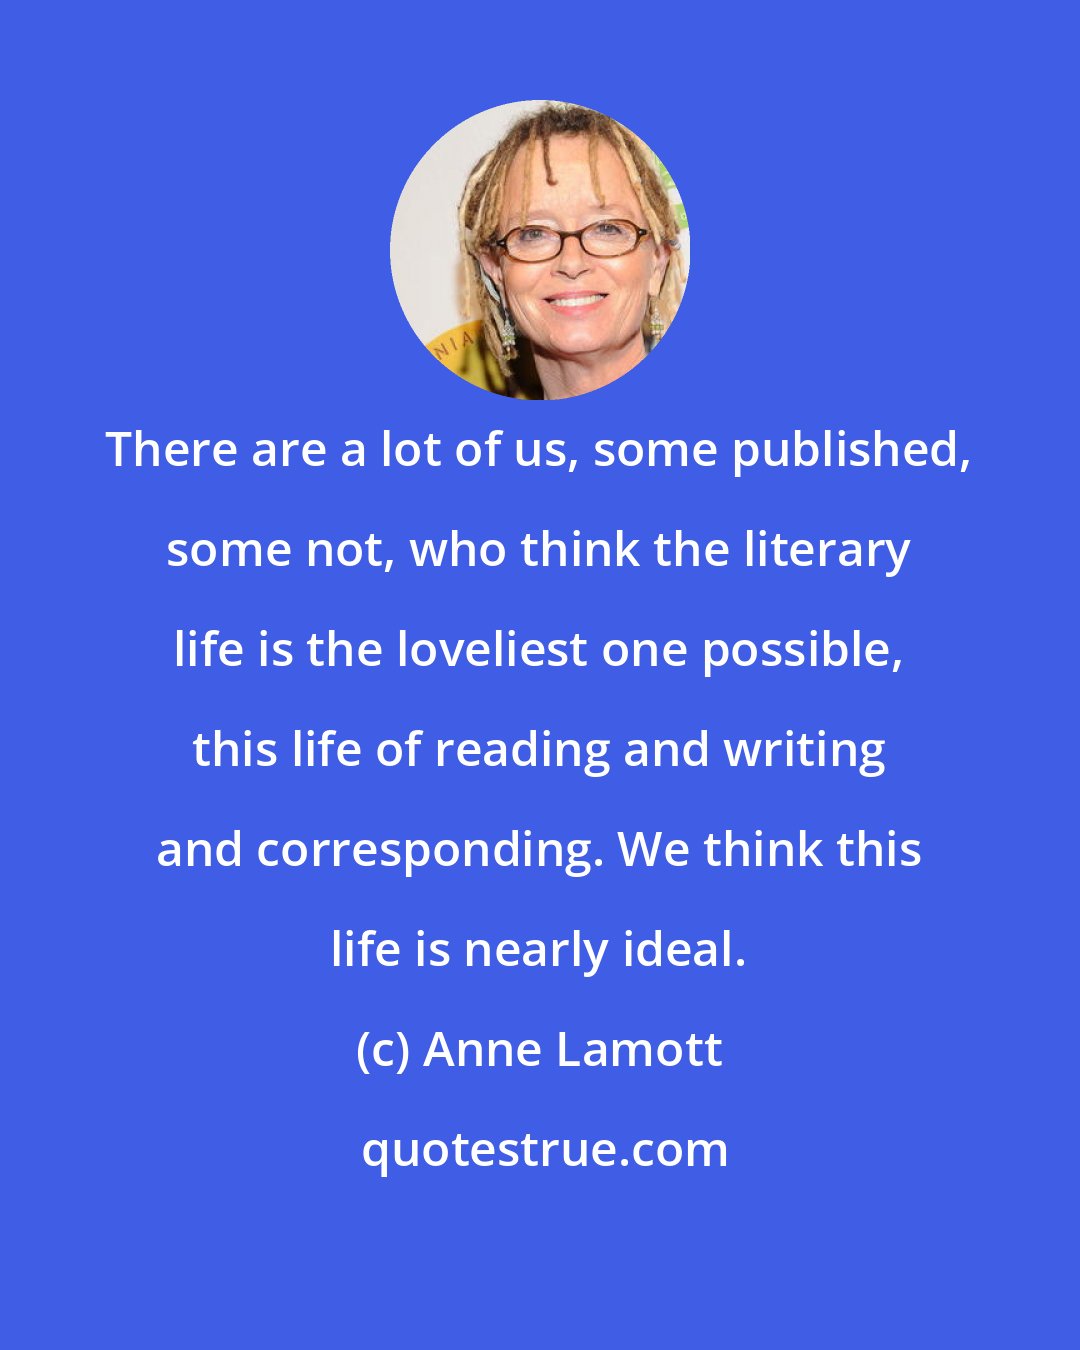 Anne Lamott: There are a lot of us, some published, some not, who think the literary life is the loveliest one possible, this life of reading and writing and corresponding. We think this life is nearly ideal.